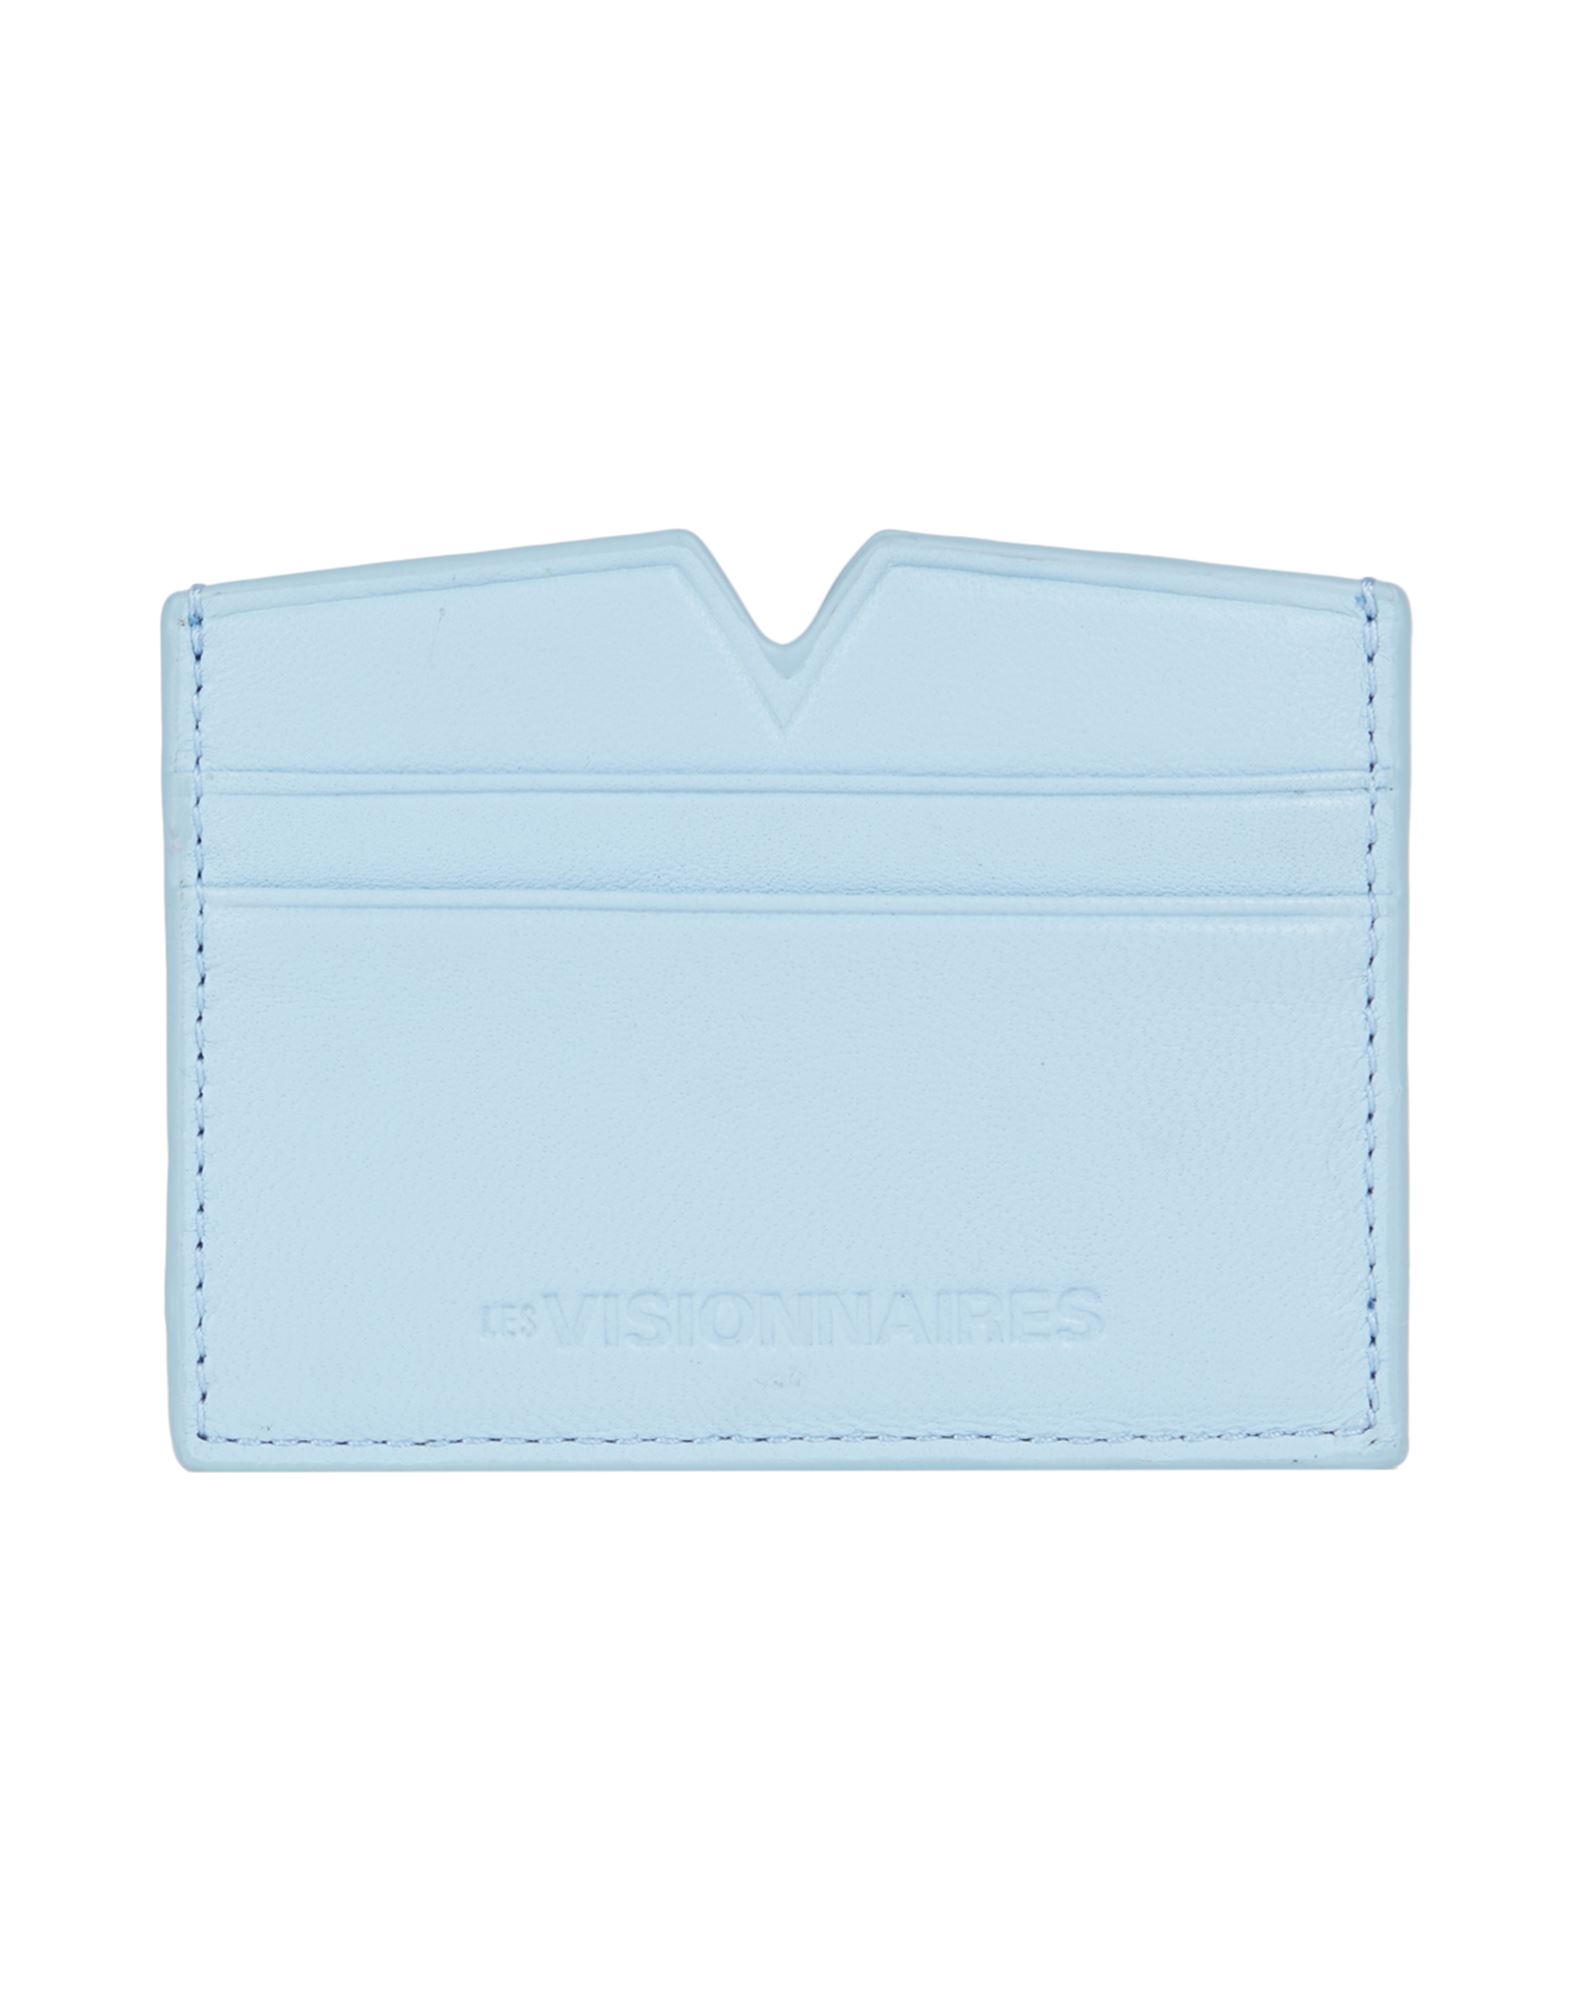 Les Visionnaires Document Holders In Blue